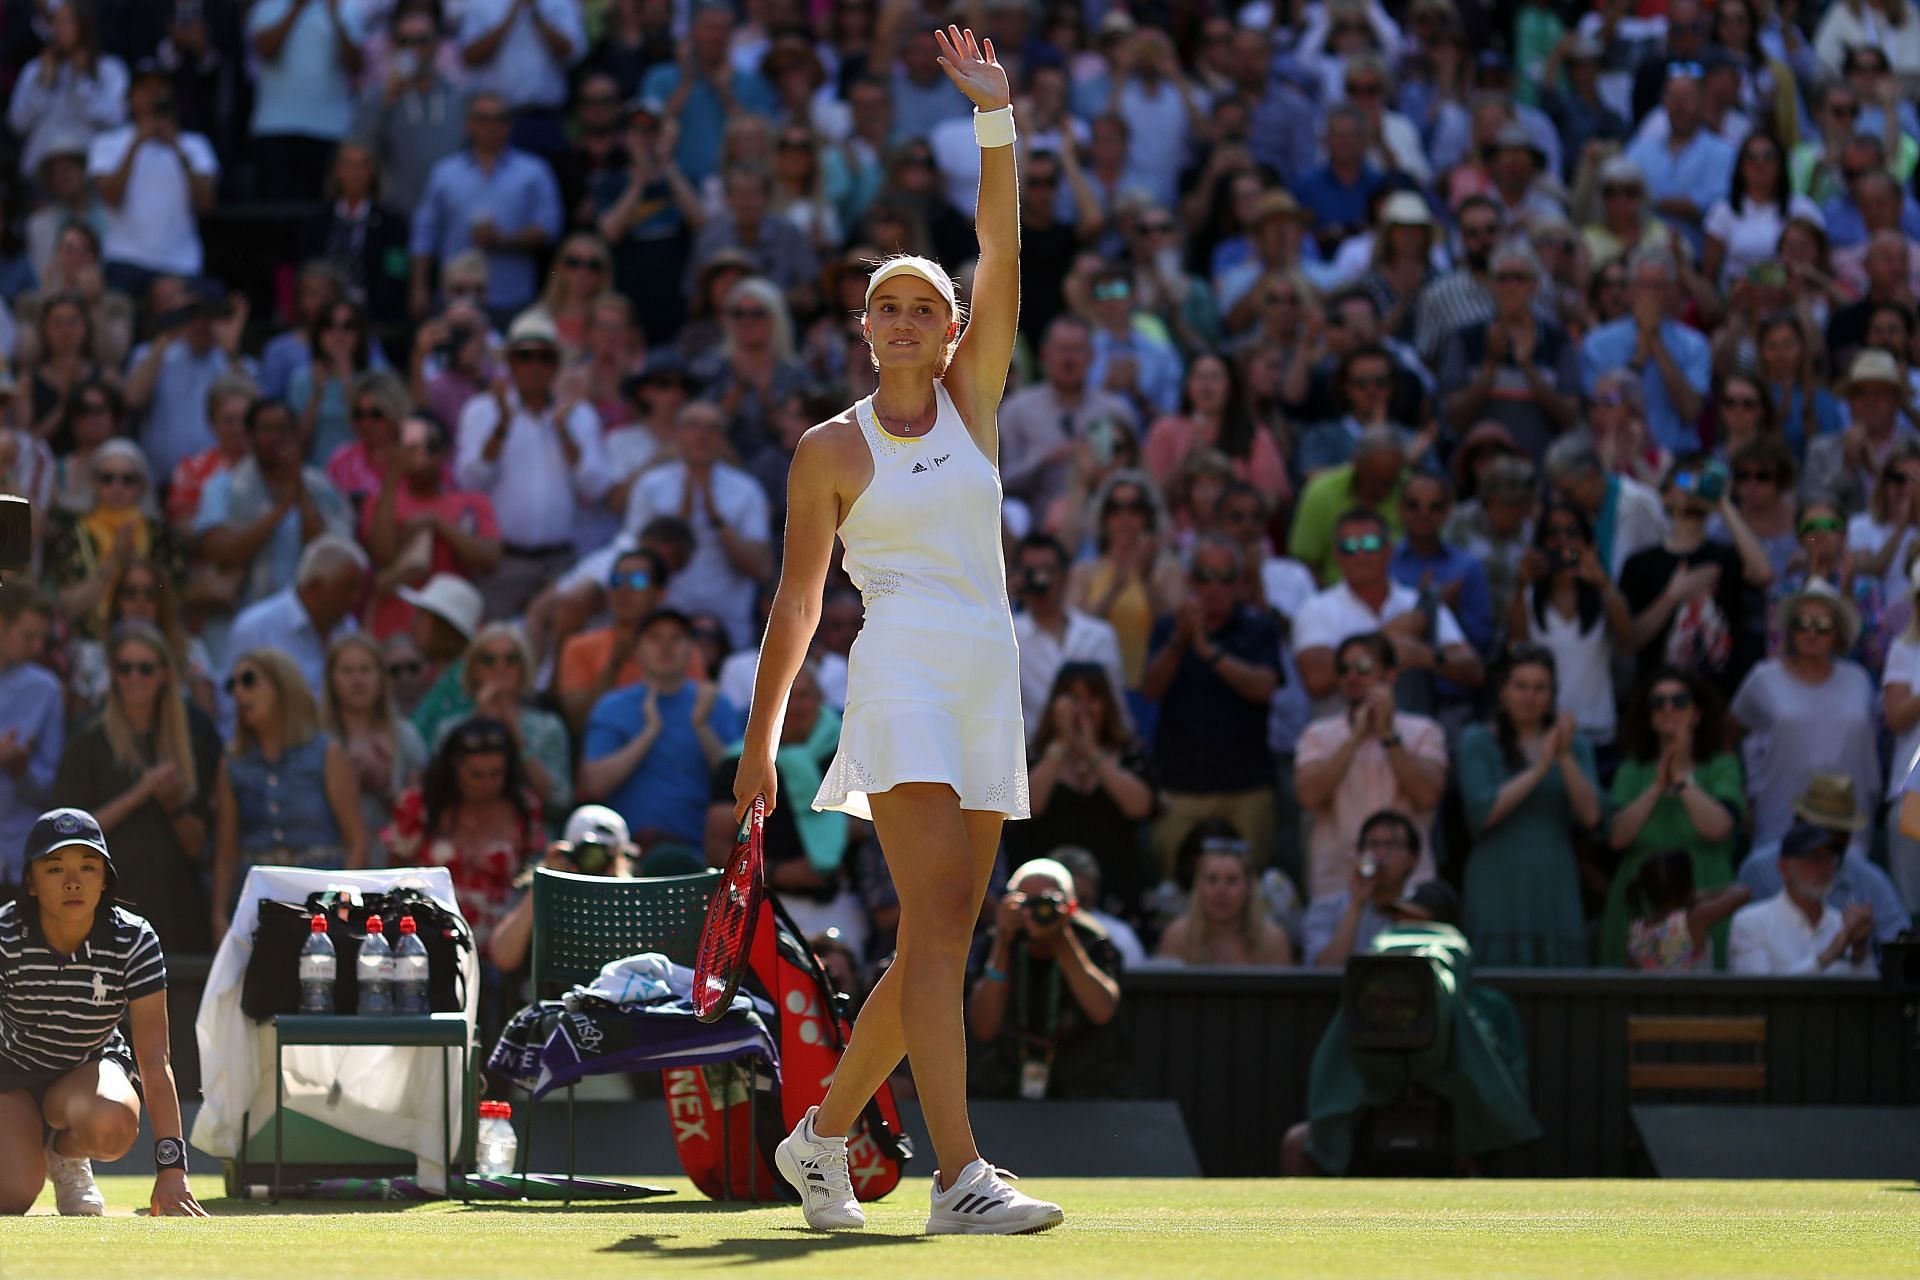 Elena Rybakina acknowledges the crowd after winning the semifinal.